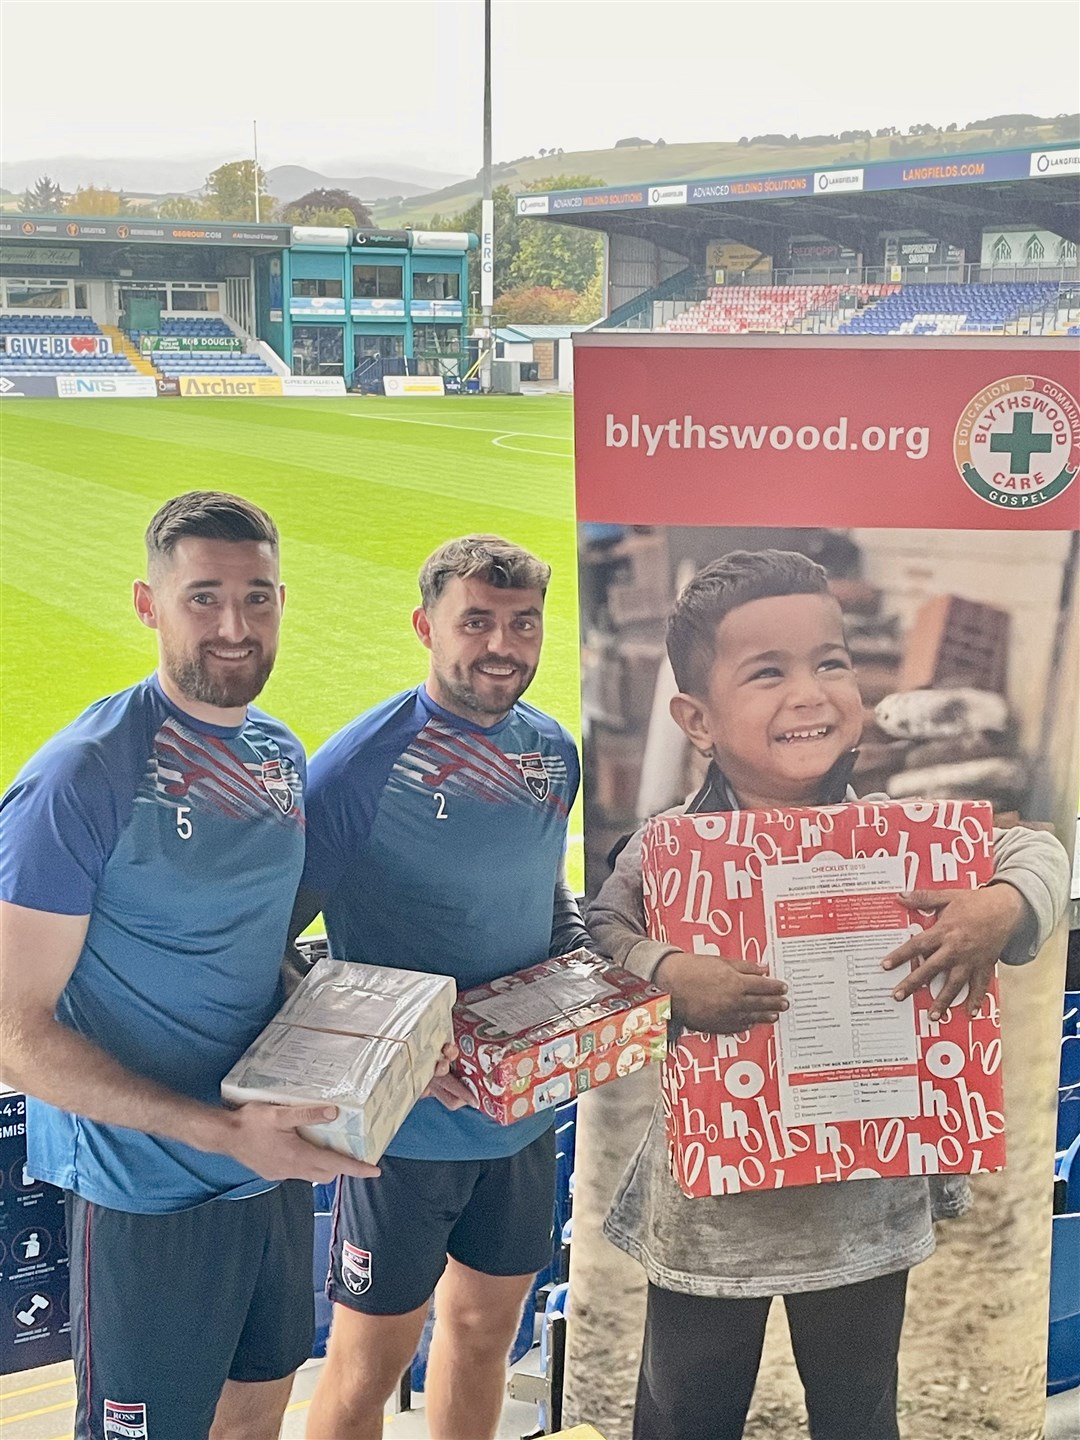 Ross County FC players are showing their support for the Blythswood appeal.